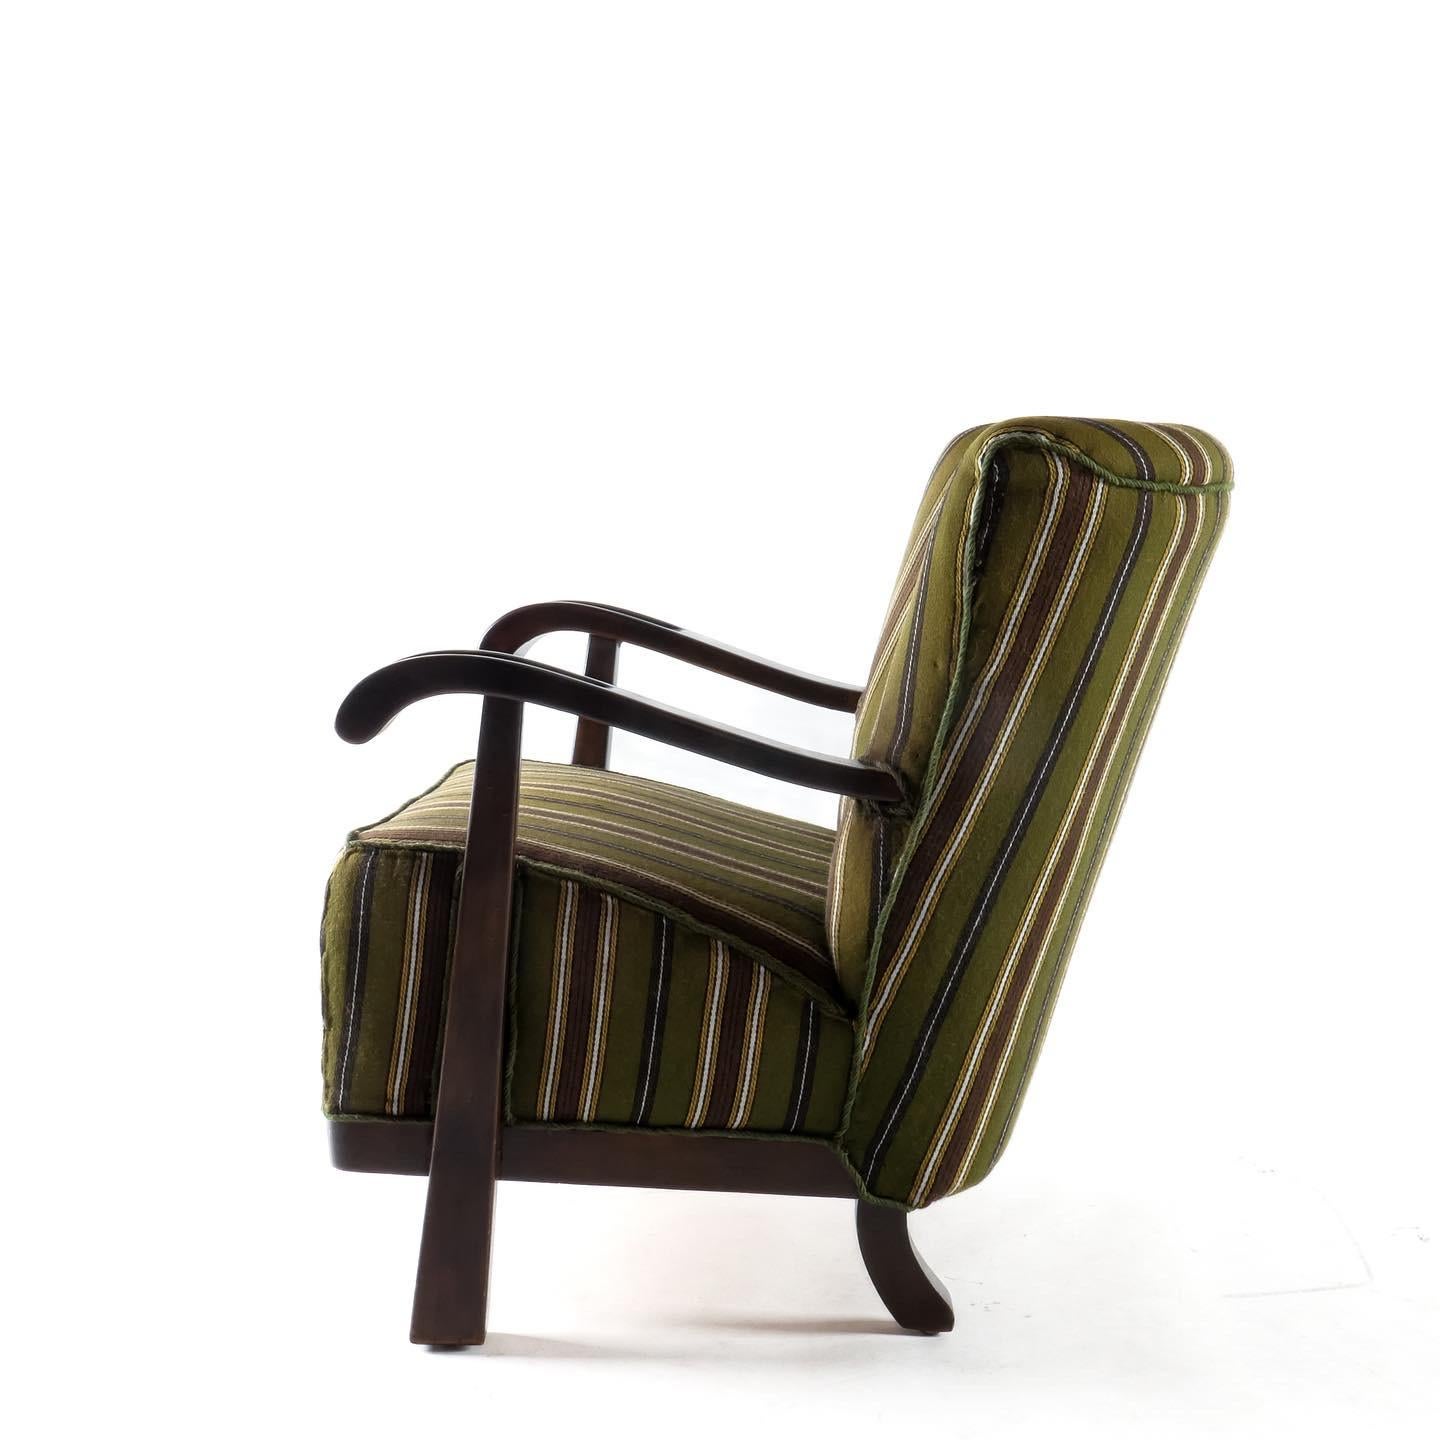 A classic silhouette armchair from Magnus Oleson circa 1930s. Dark stained Beech frame and striped wool upholstery which appears to be original. Dramatic side profile with button tufted backrest. Presents well and is comfortable although